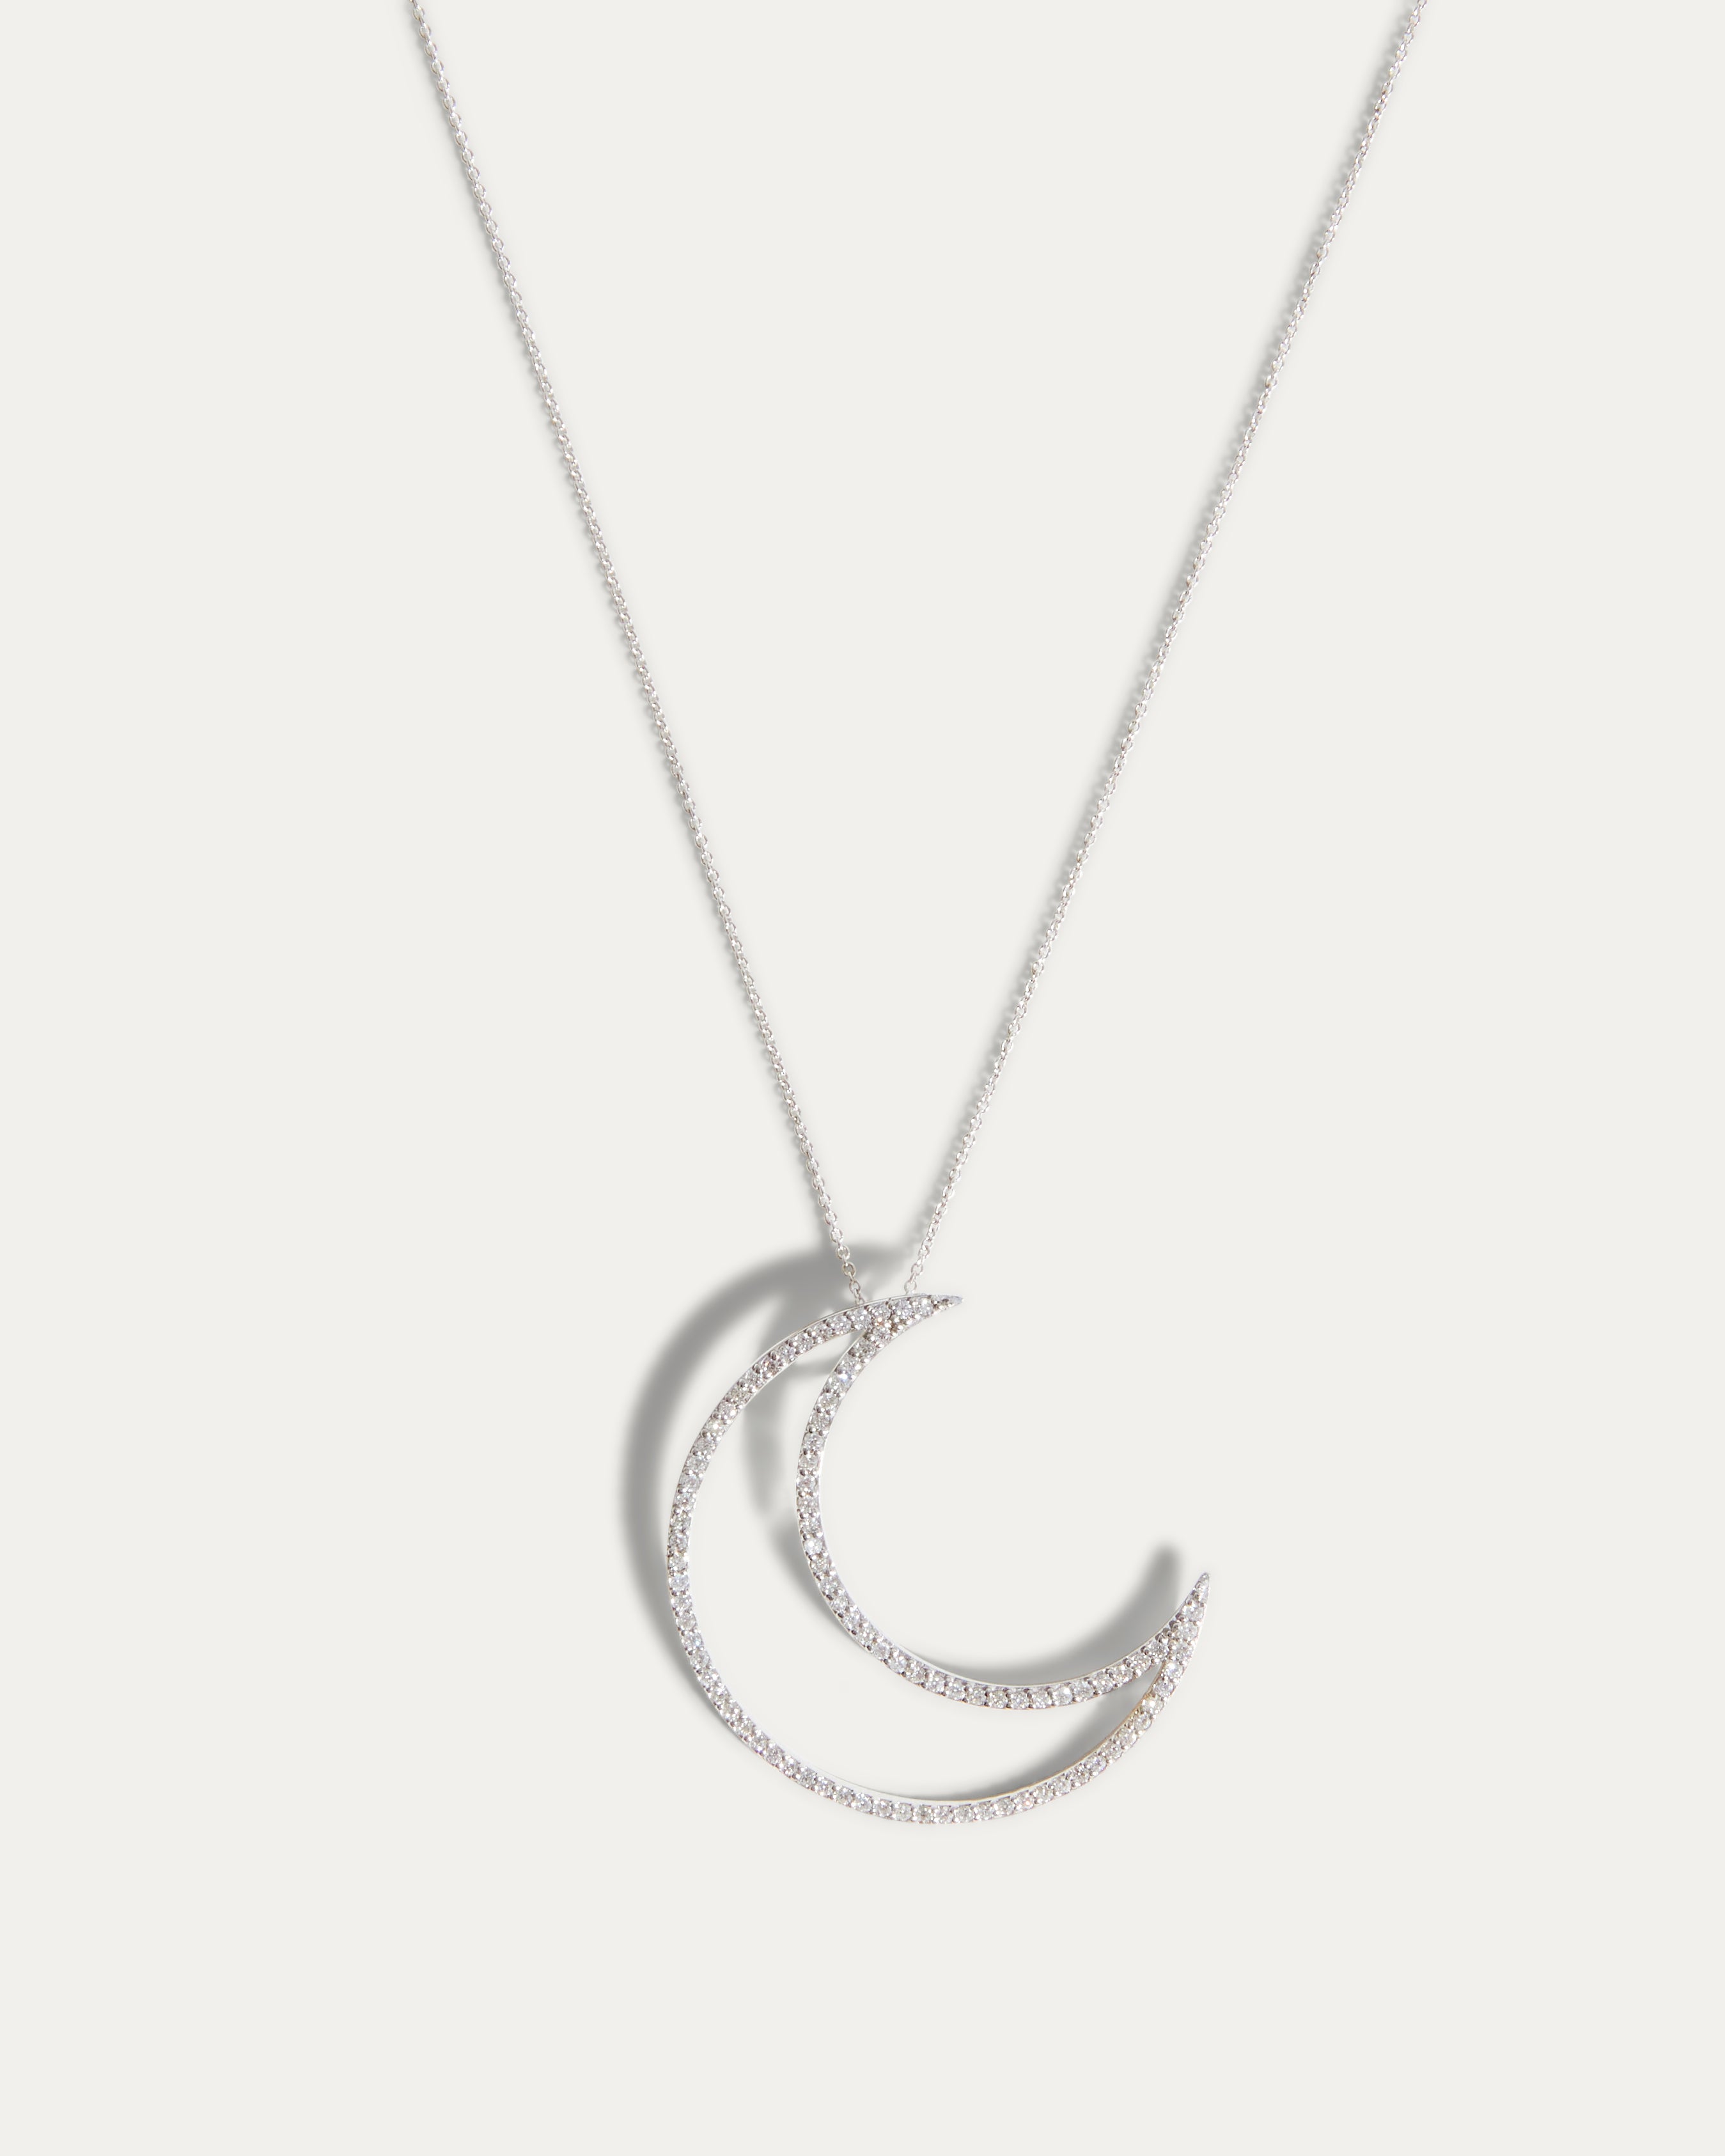 Tiffany & Co. Paloma Picasso Crescent Moon Necklace Silver 925 9.6inch 16